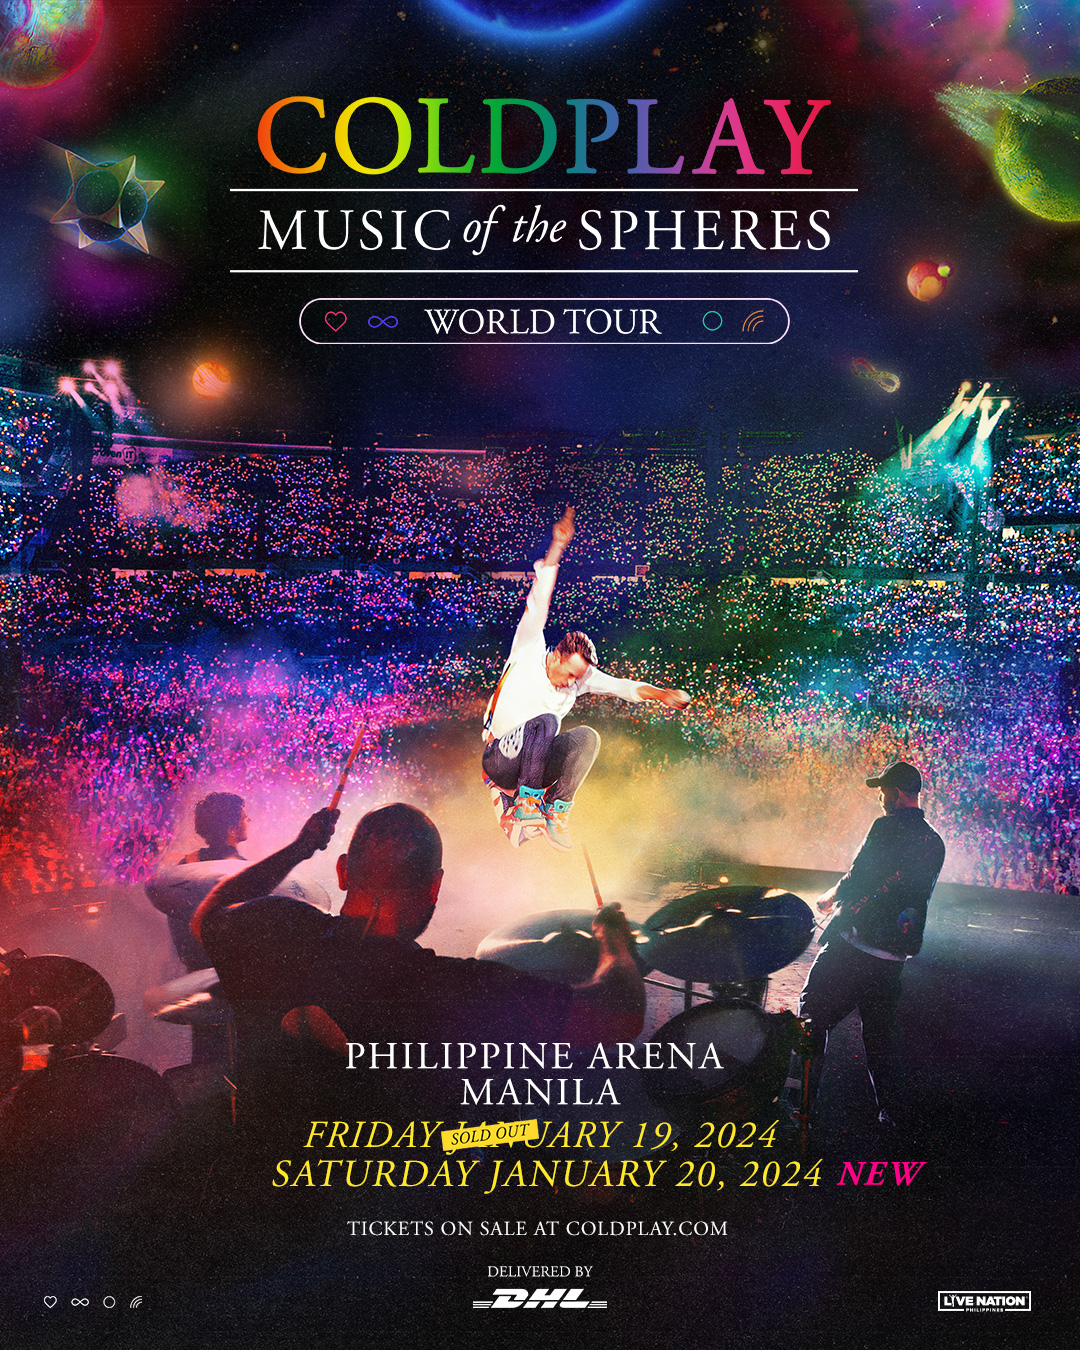 coldplay concert 2024 Manila Philippines